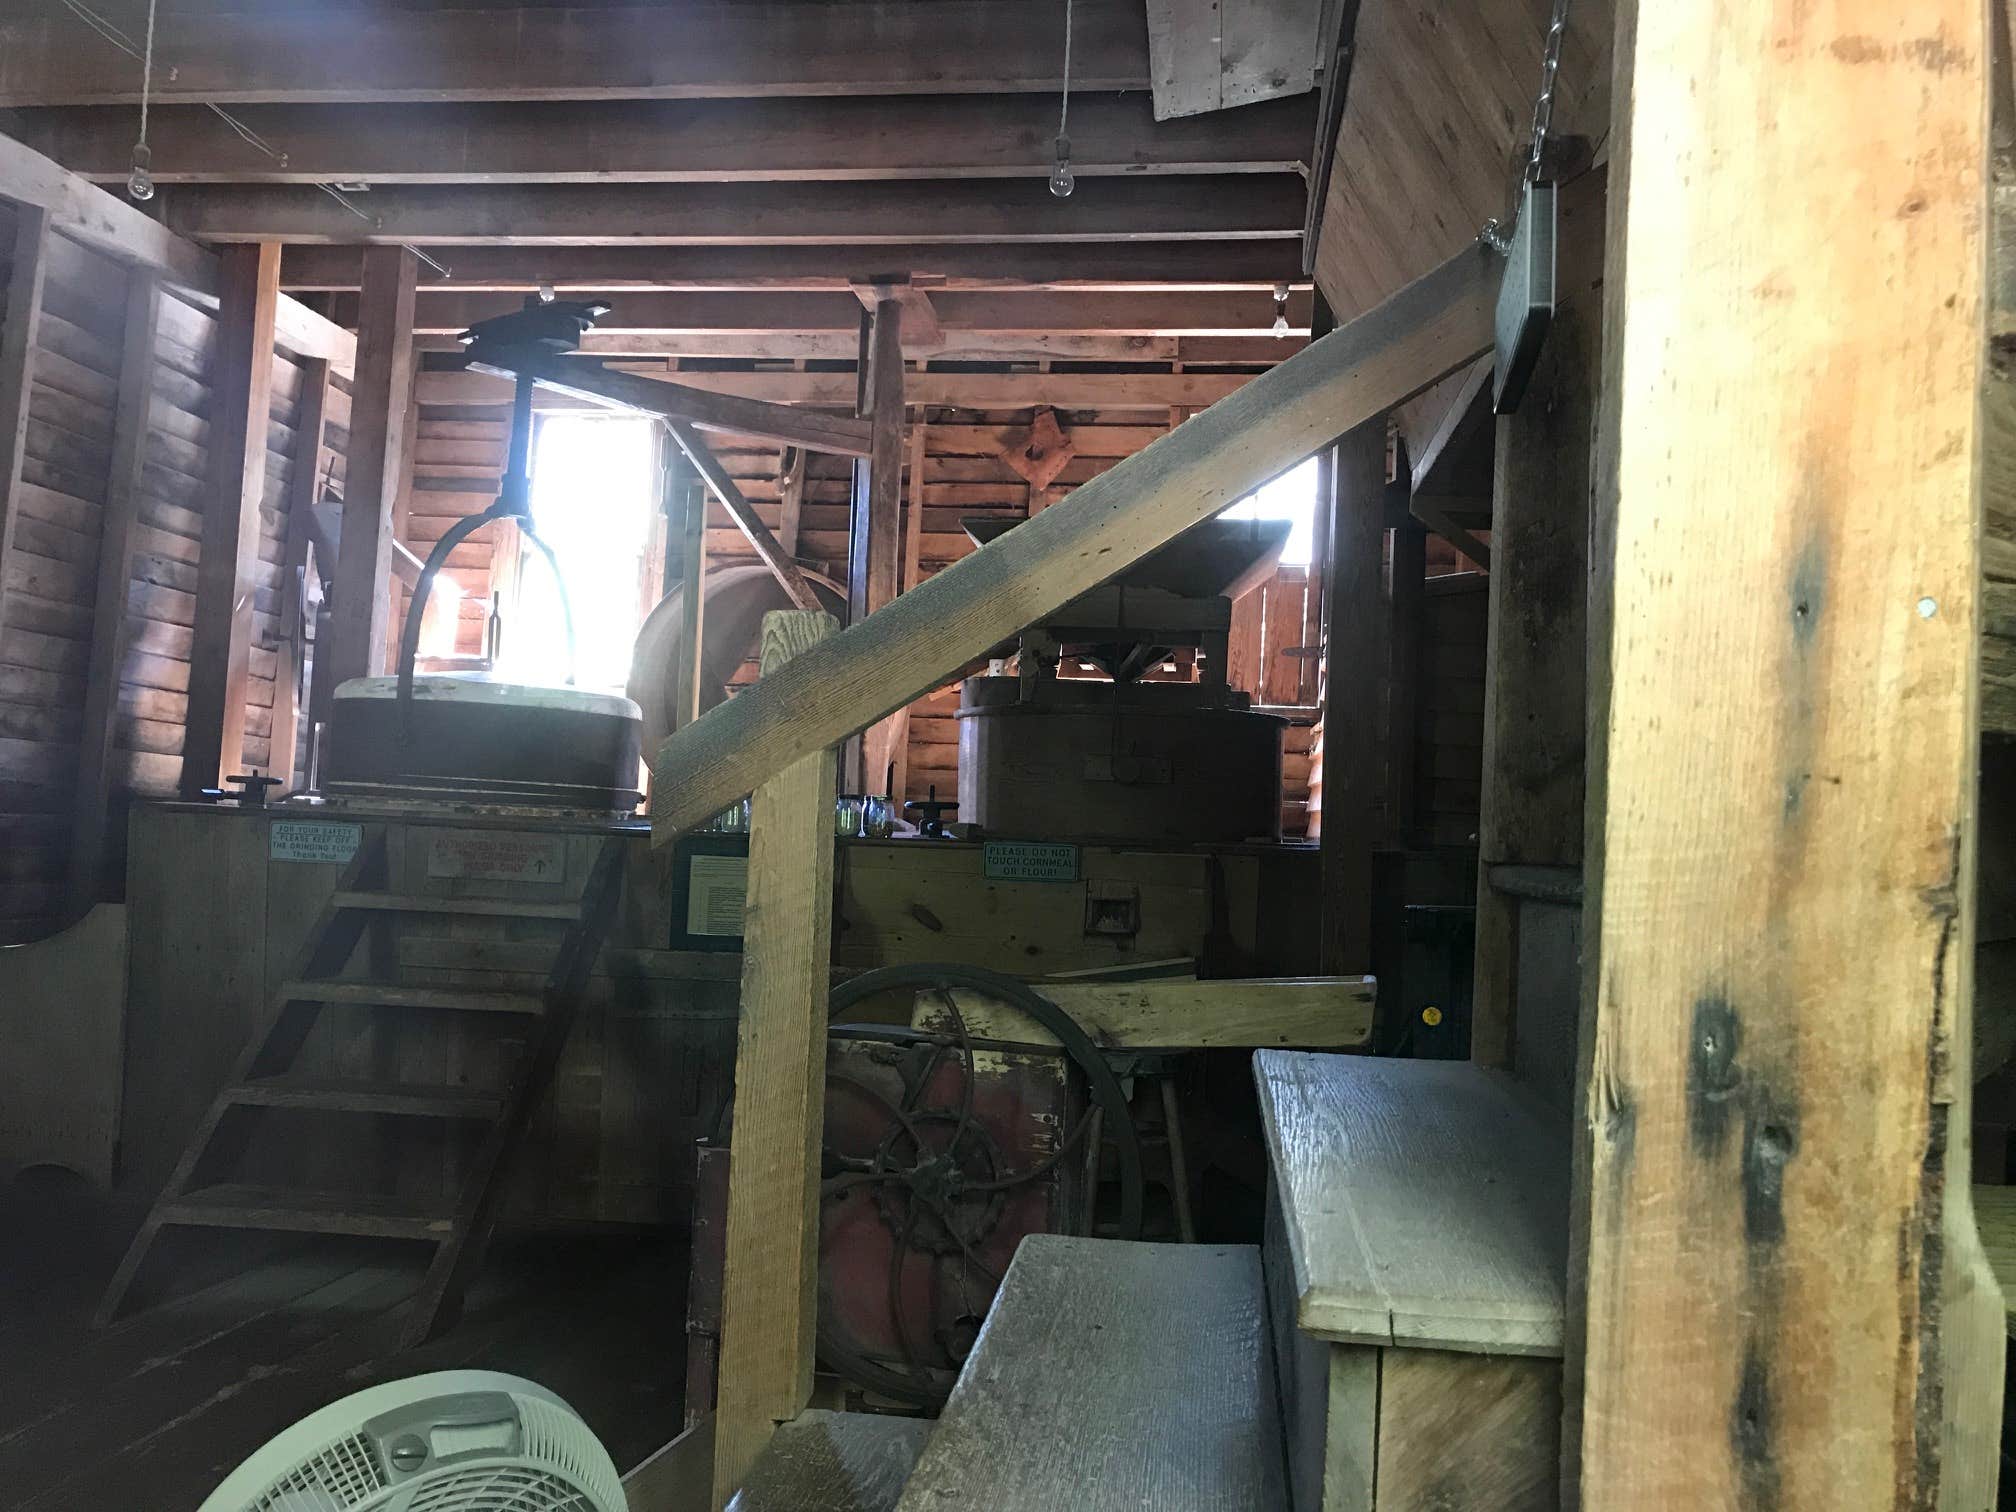 Gristmill interior